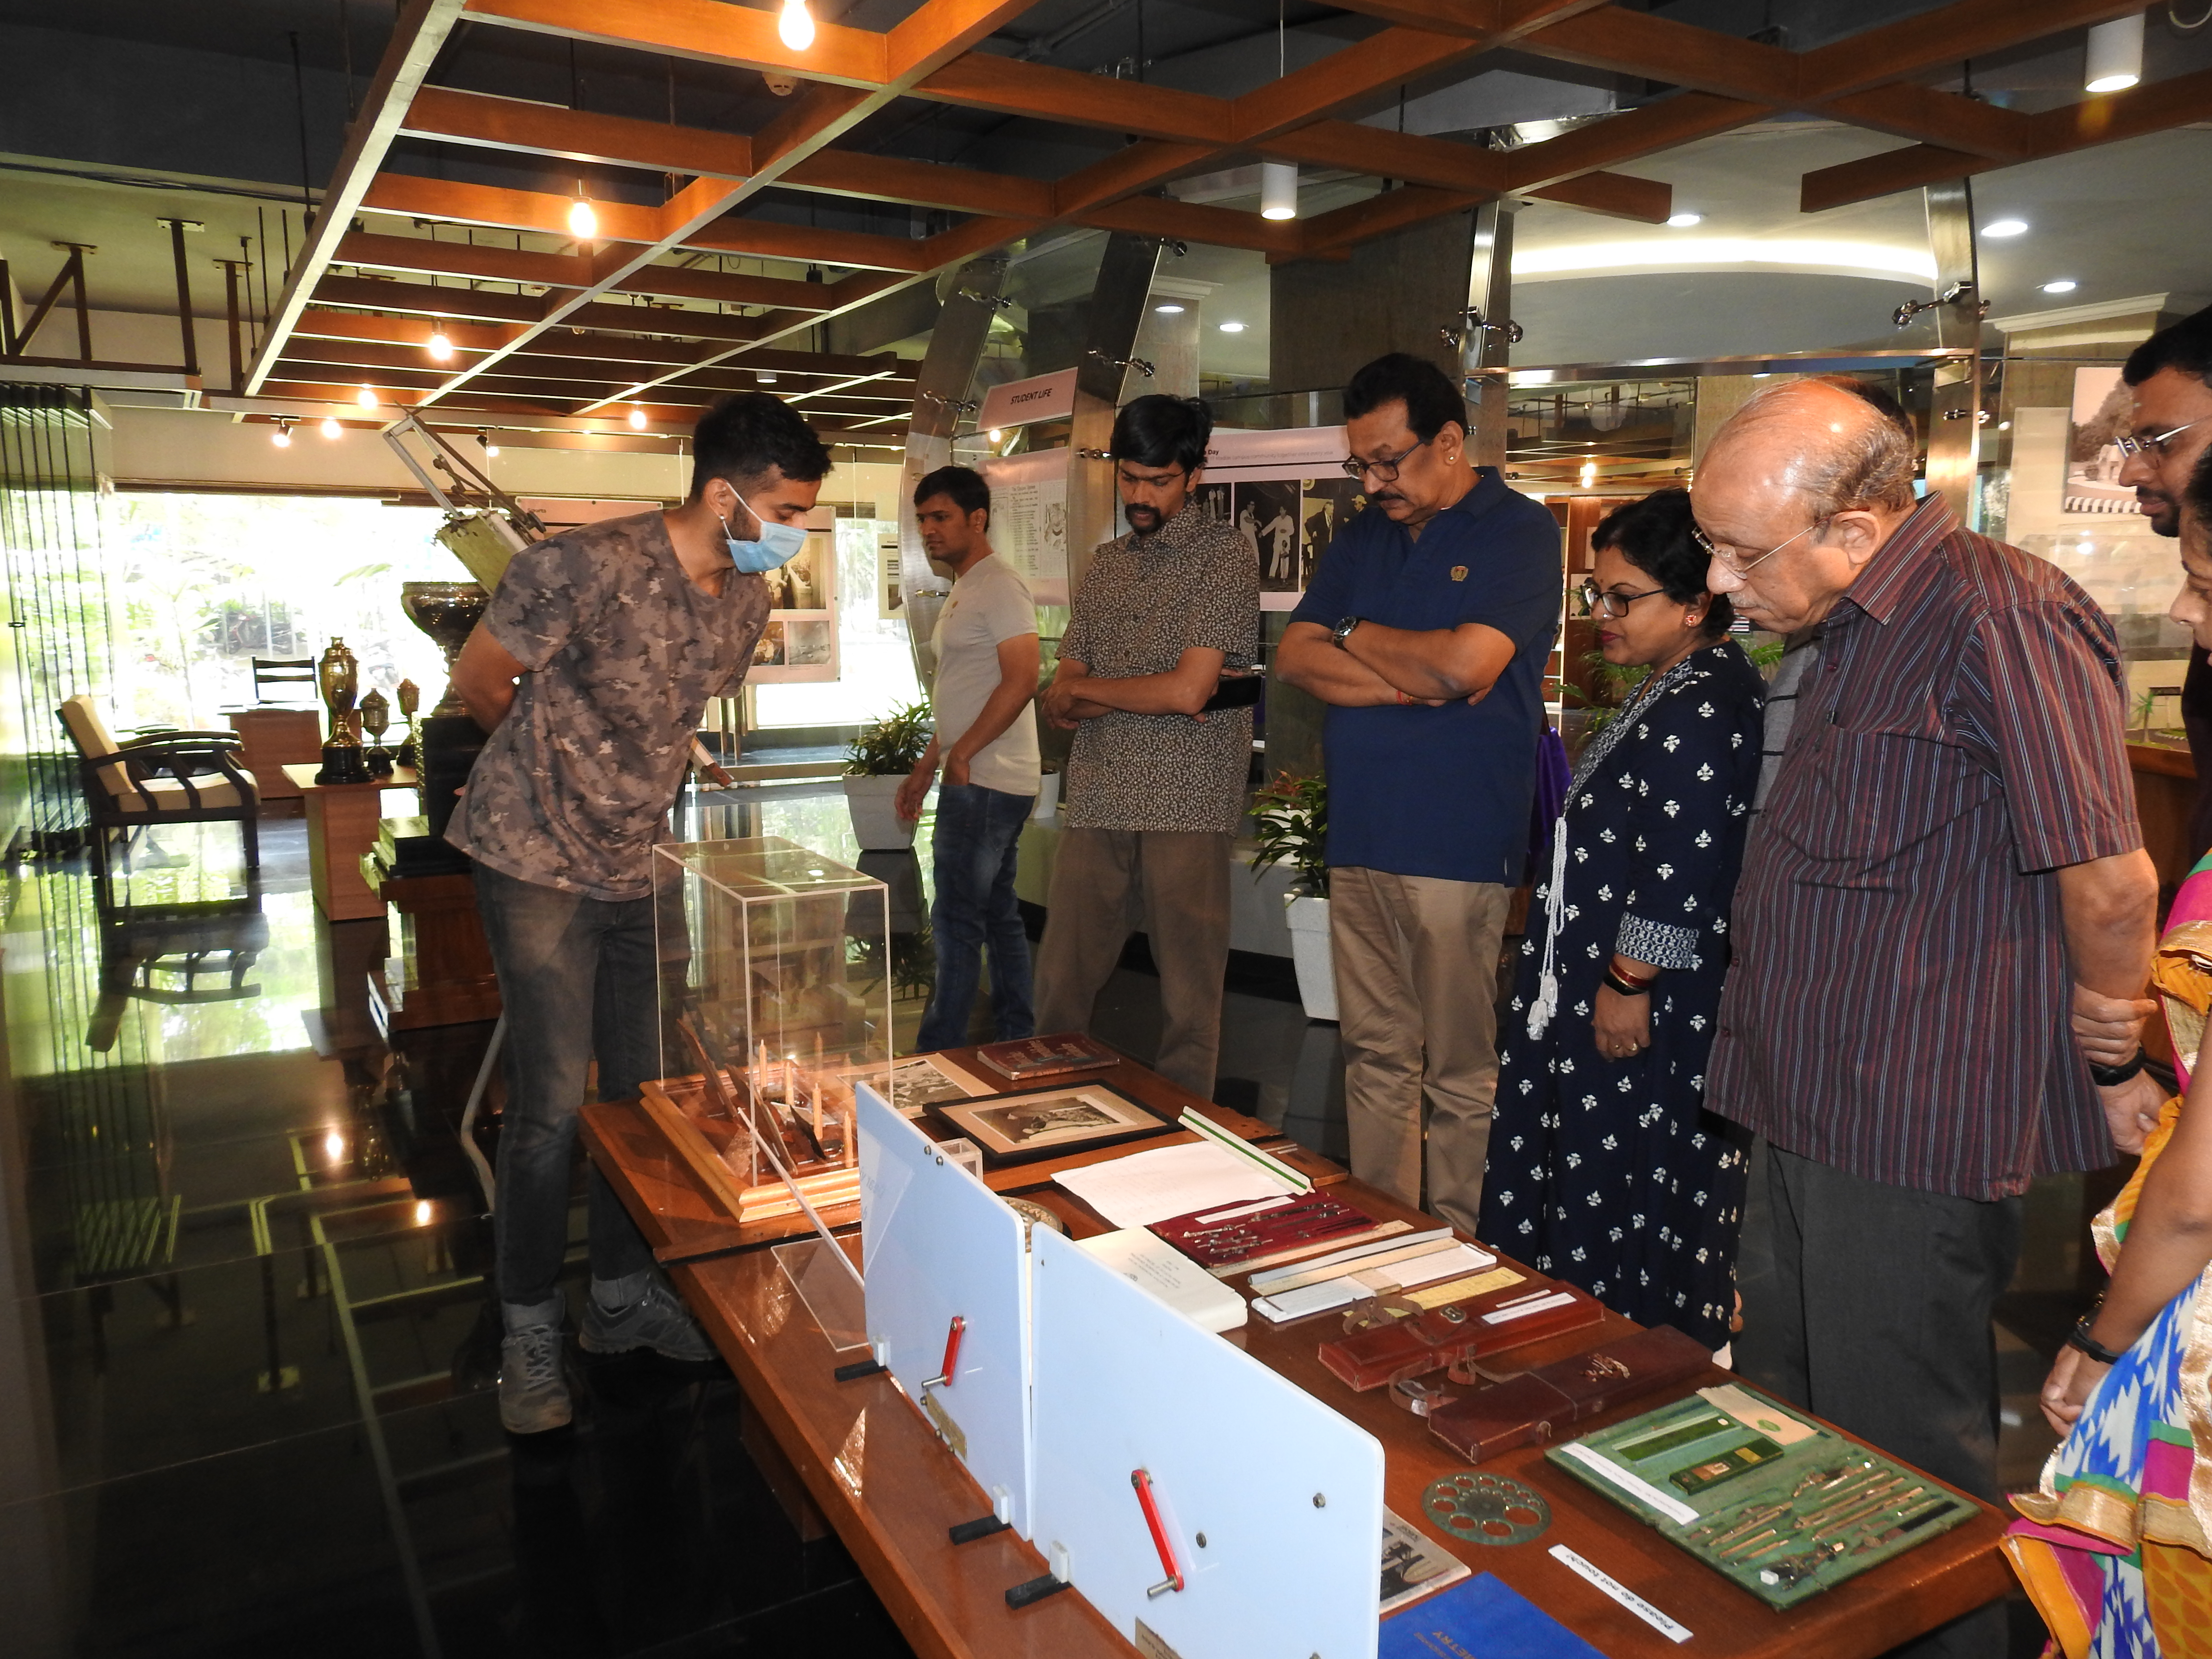 Bhuvanesh Santharam (Project Associate, Heritage Centre) provides the visitors information about the artefacts